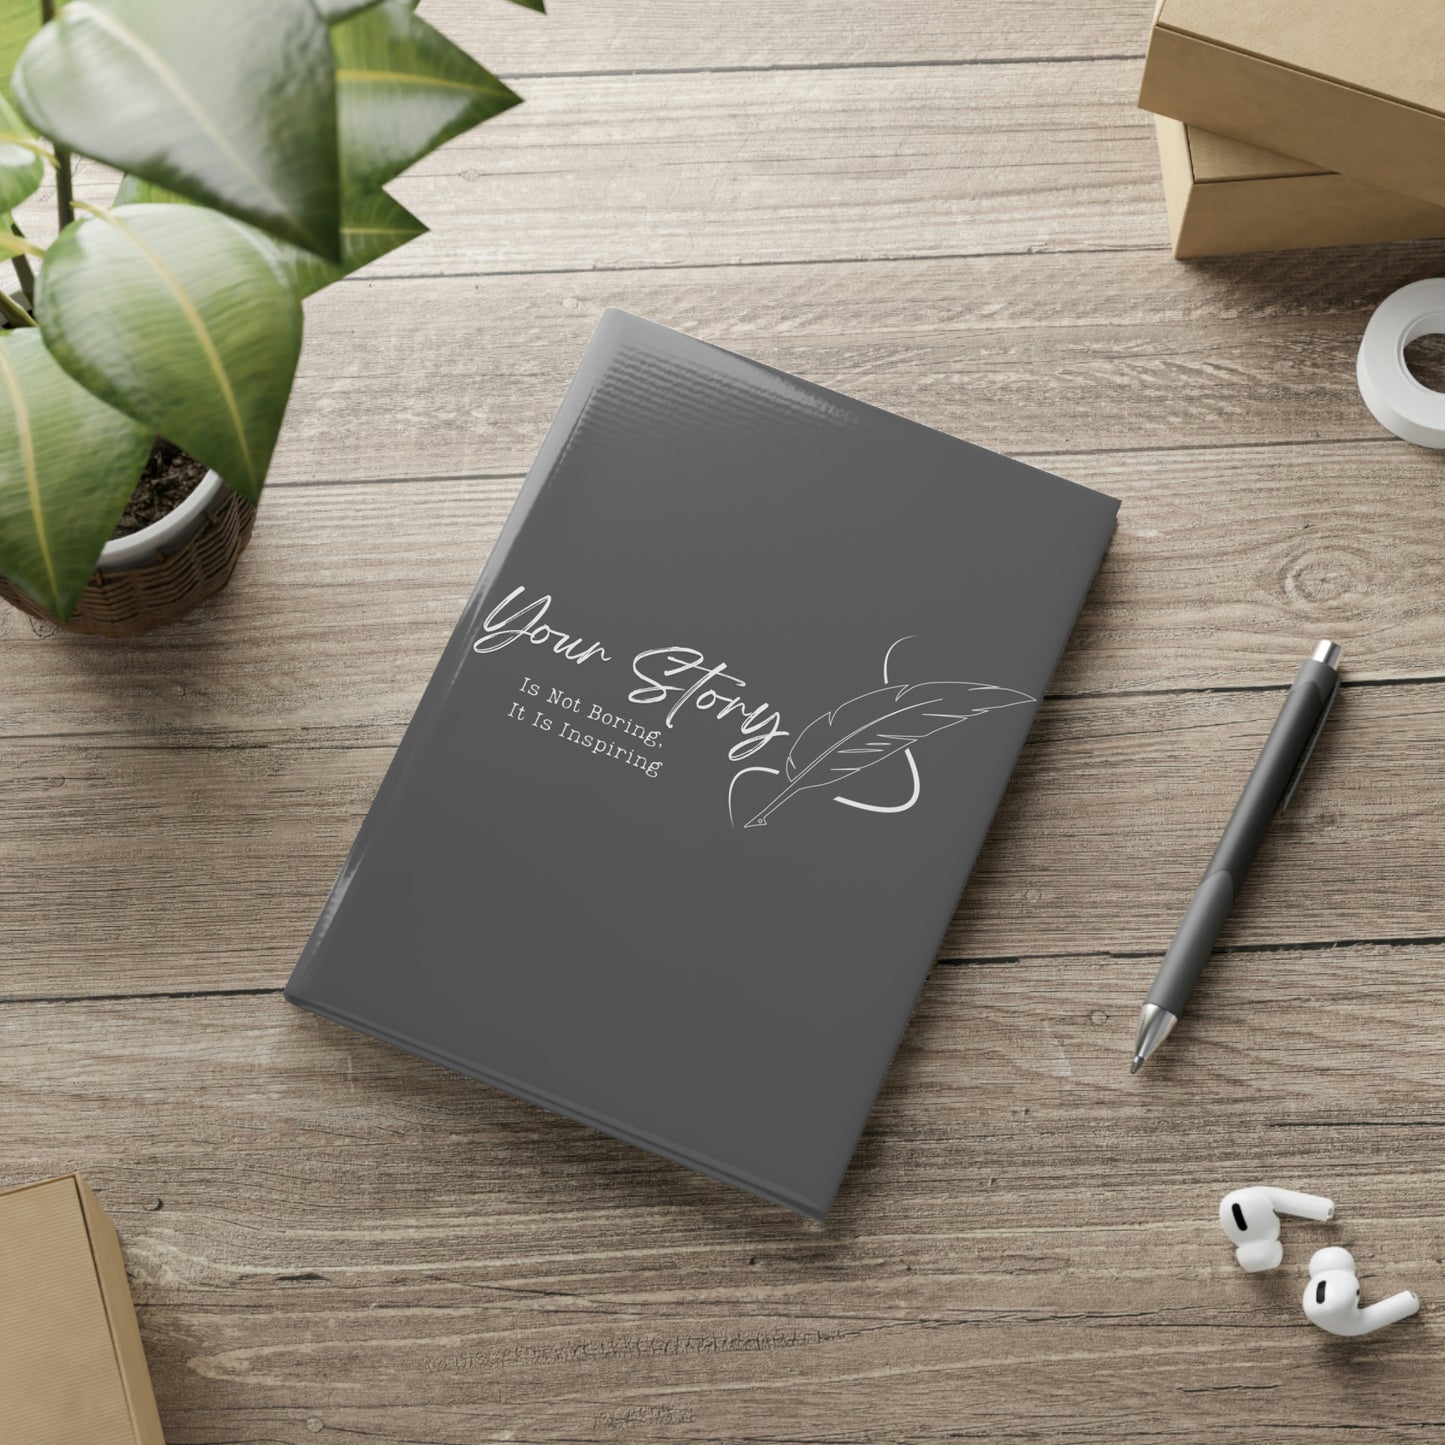 Your story is not boring // Write Out Loud // Hardcover Notebook with Puffy Covers (Gray)